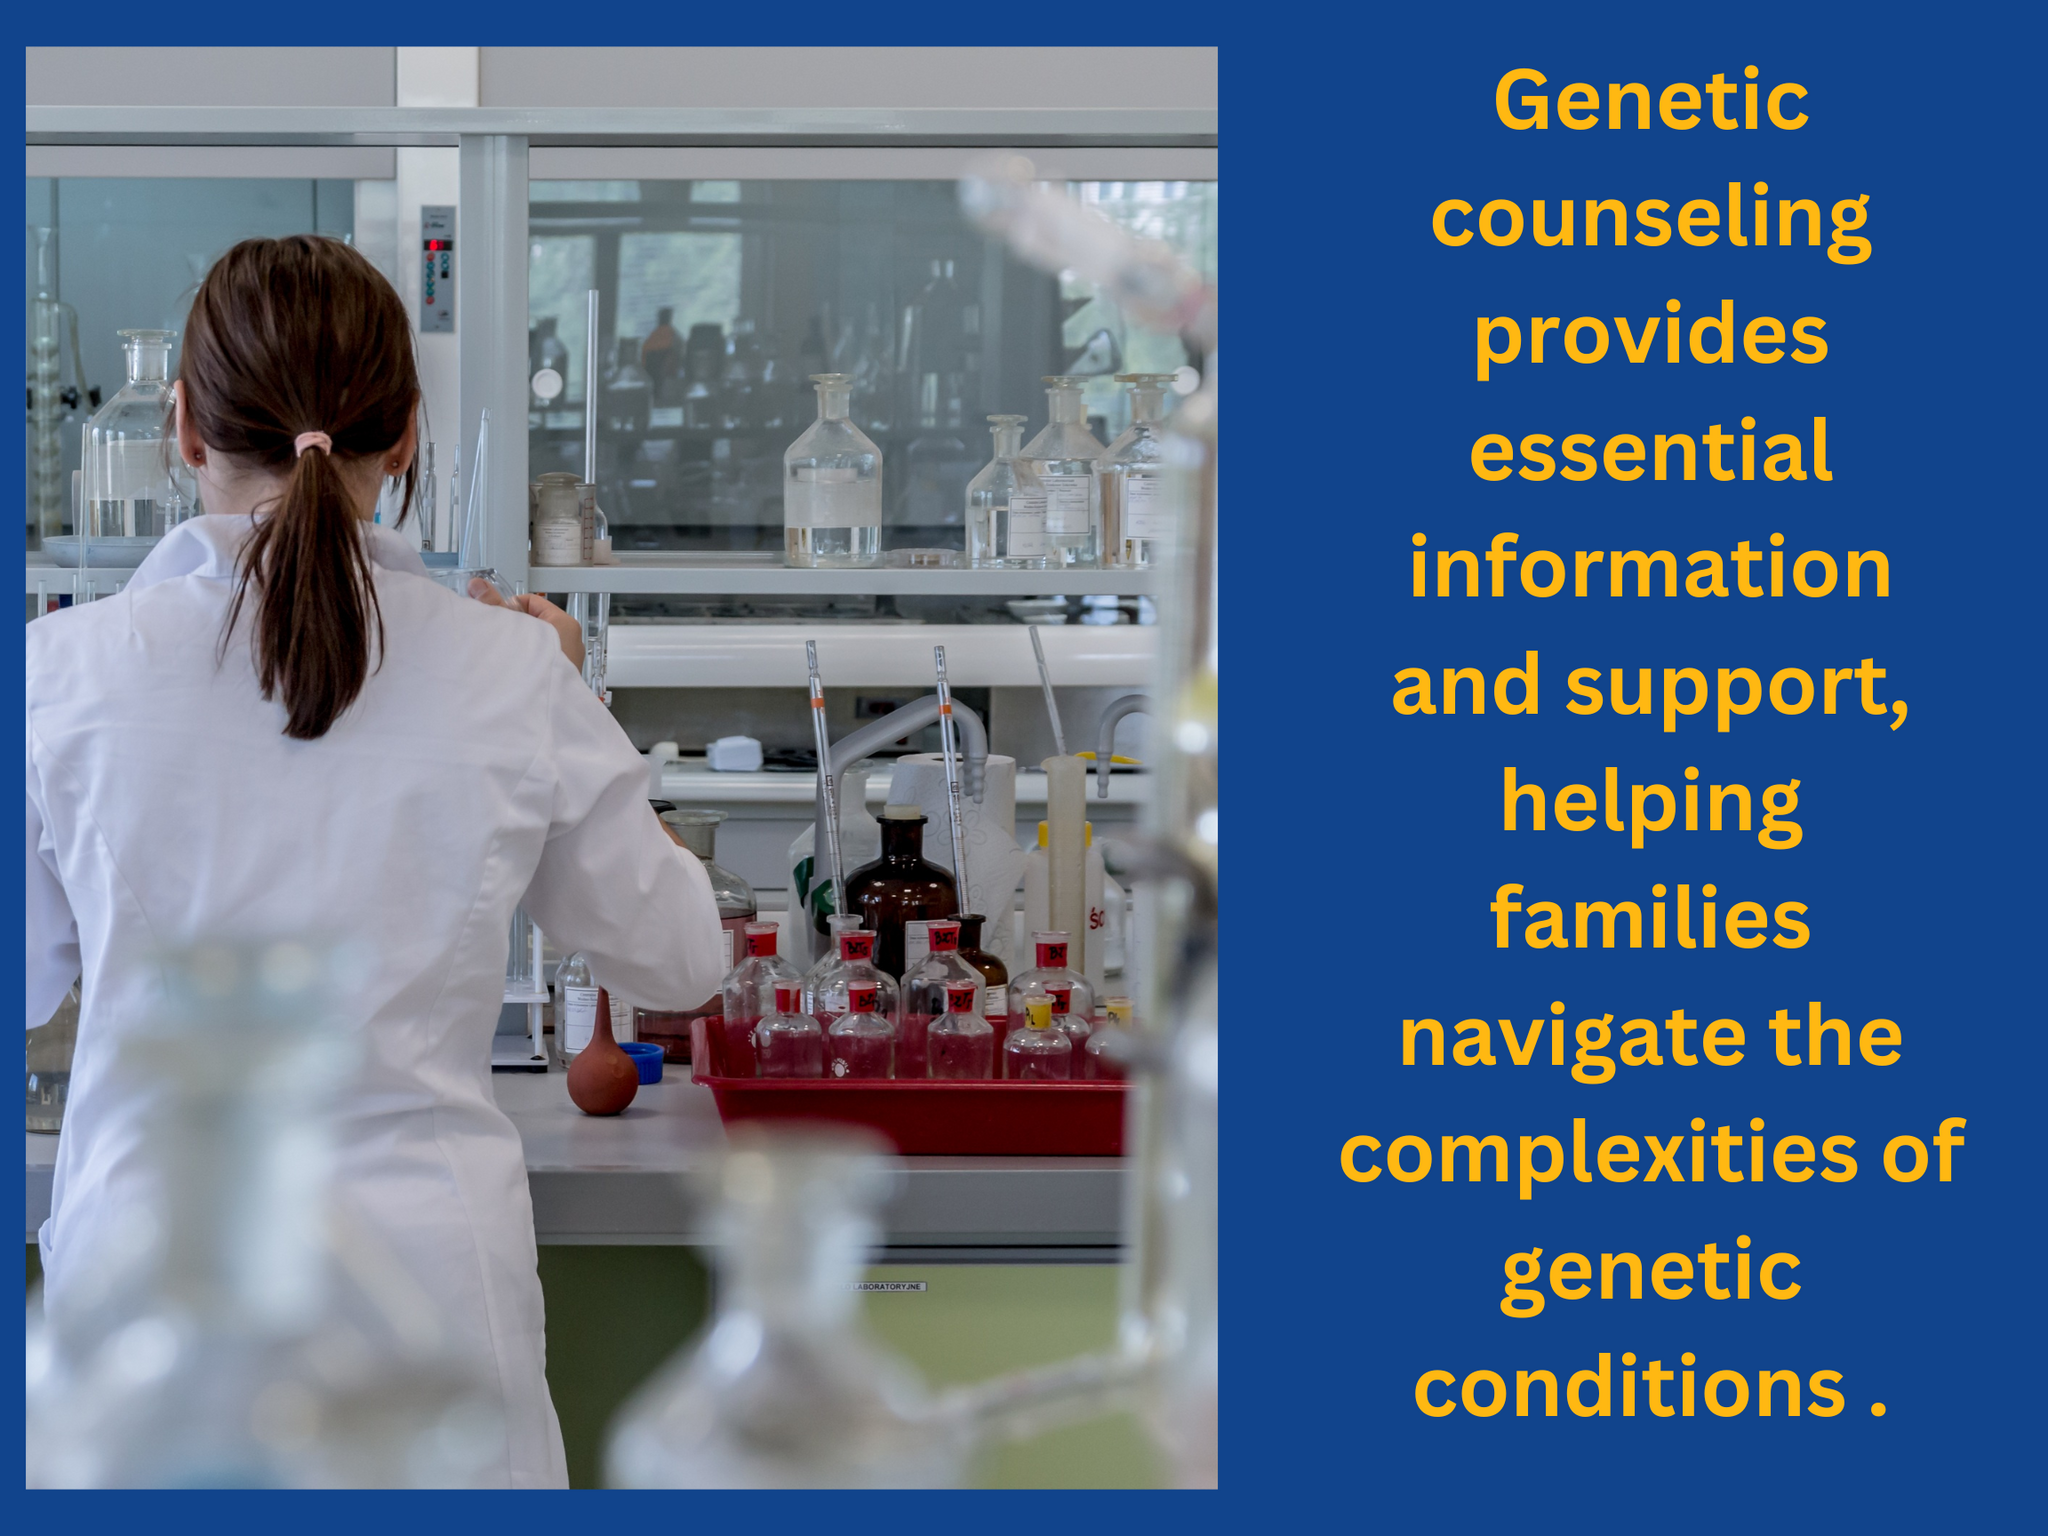 Genetic counselling to explain the complexities of genetic conditions.